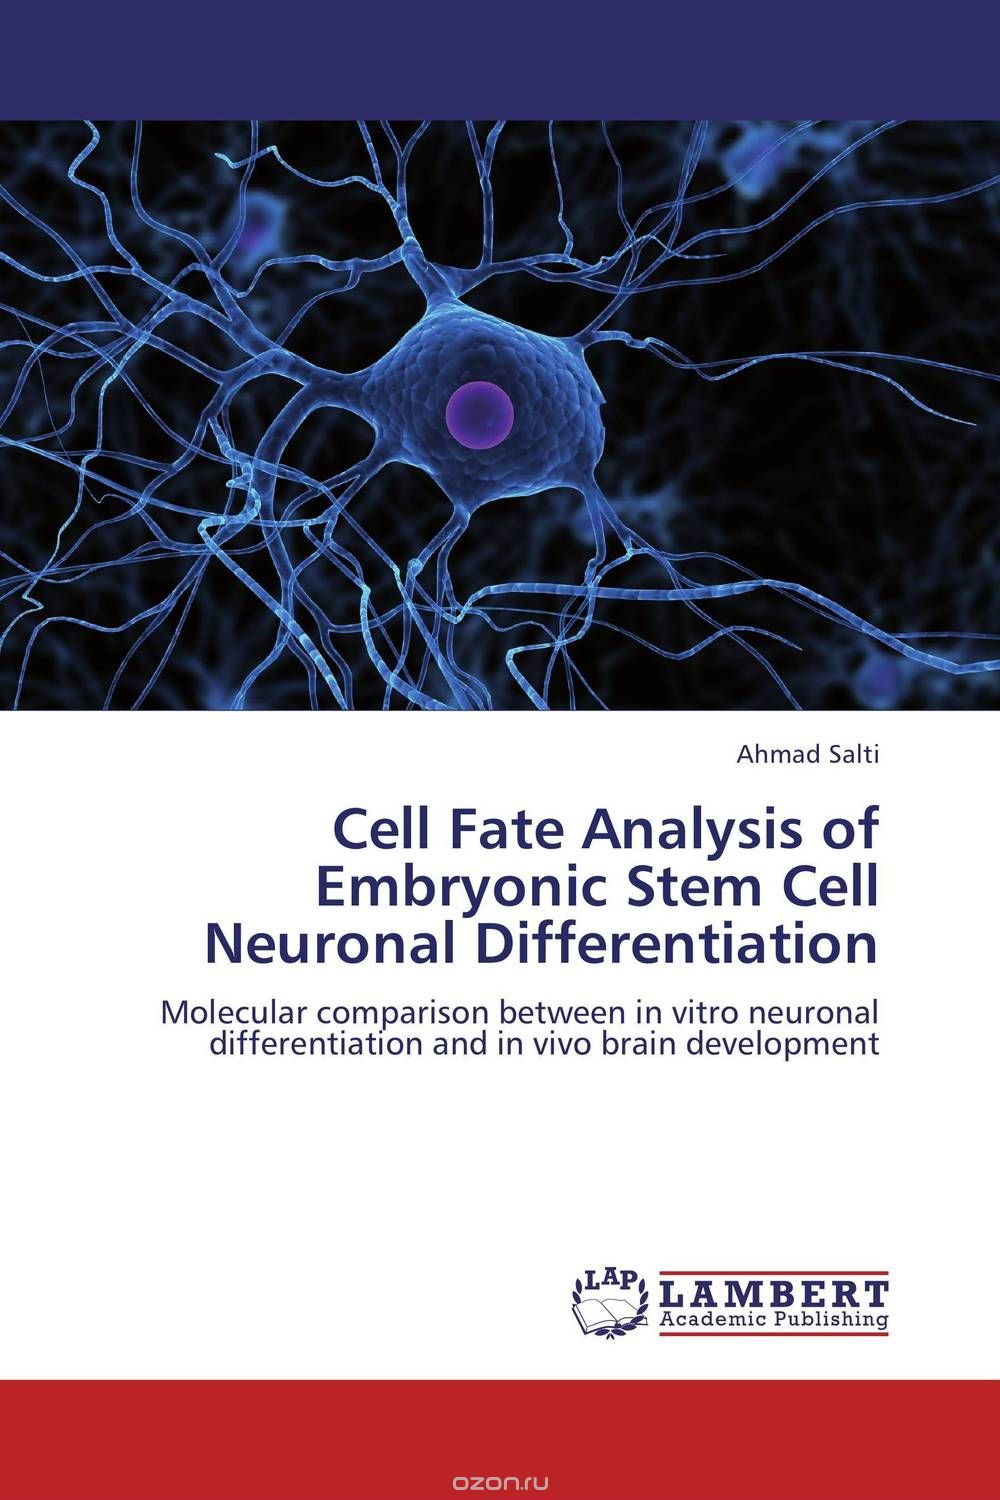 Скачать книгу "Cell Fate Analysis of Embryonic Stem Cell Neuronal Differentiation"